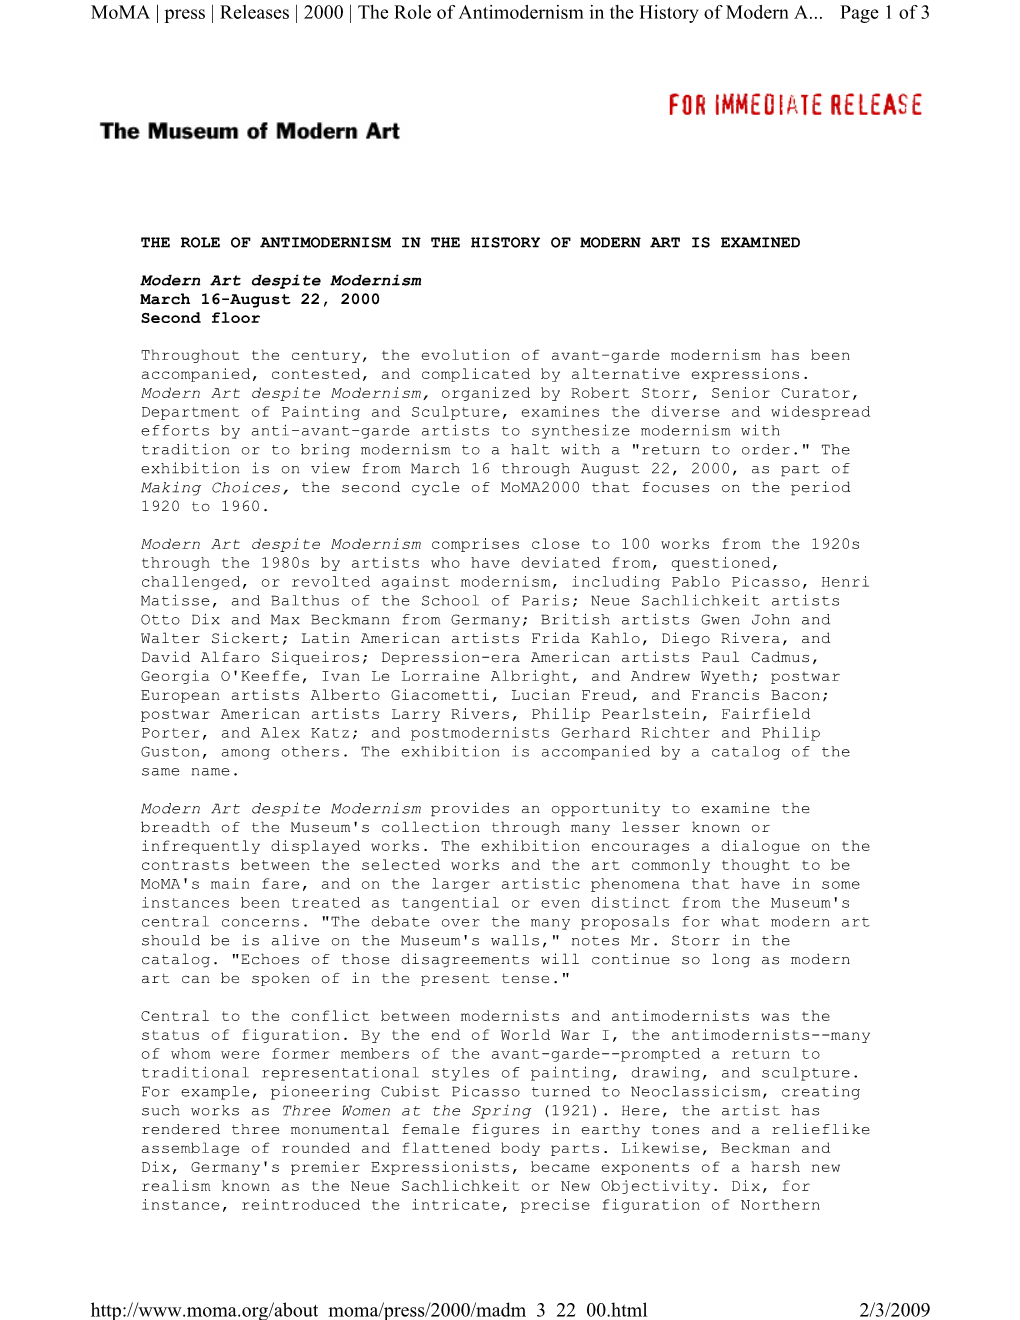 Page 1 of 3 Moma | Press | Releases | 2000 | the Role of Antimodernism